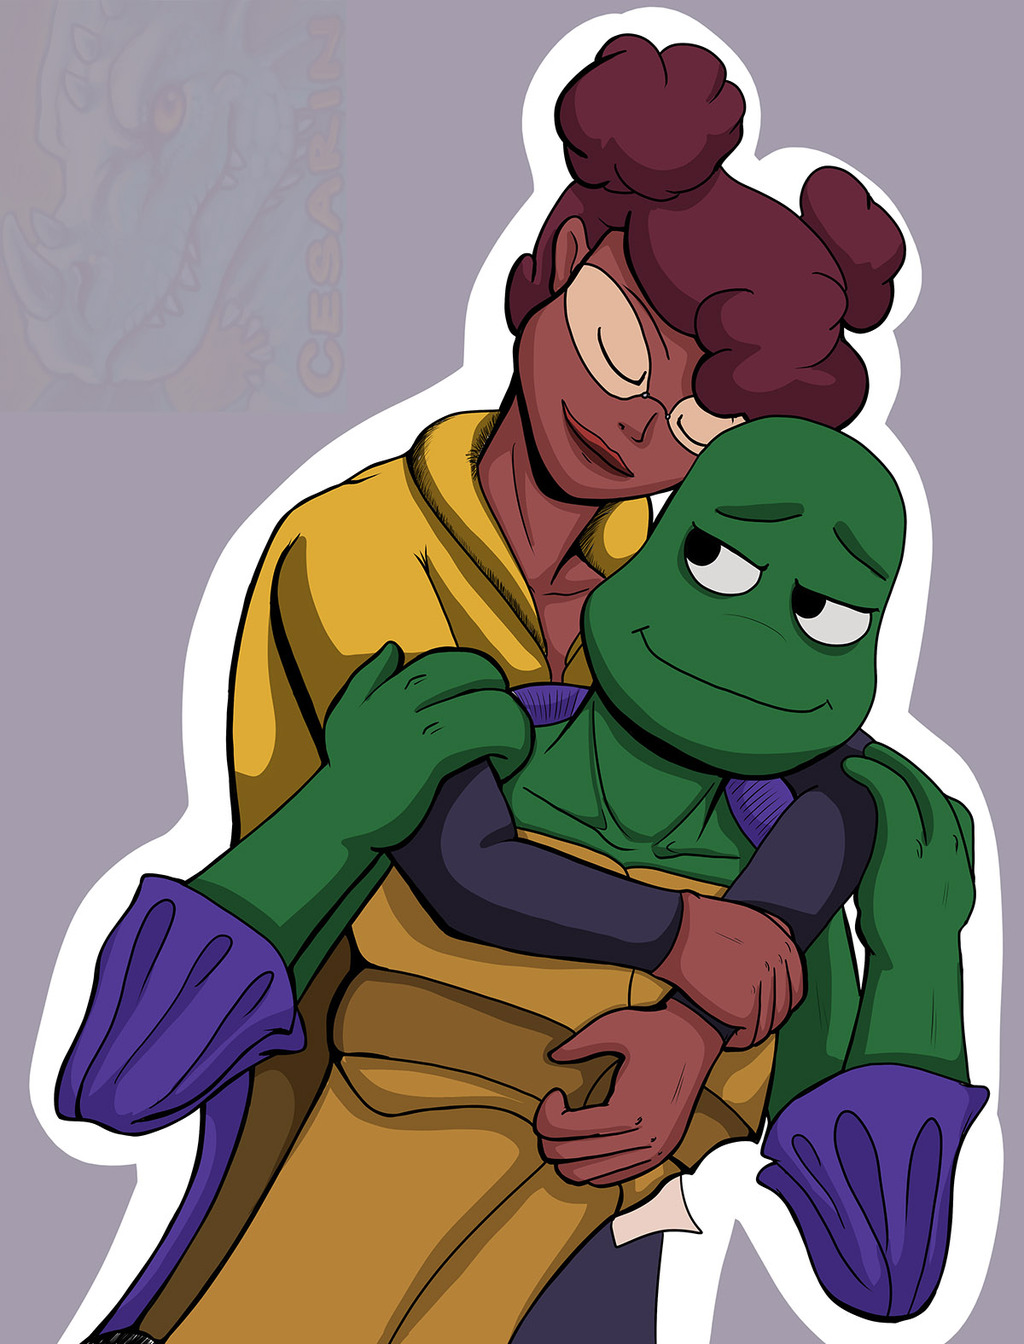 [FANART] April and Donnie